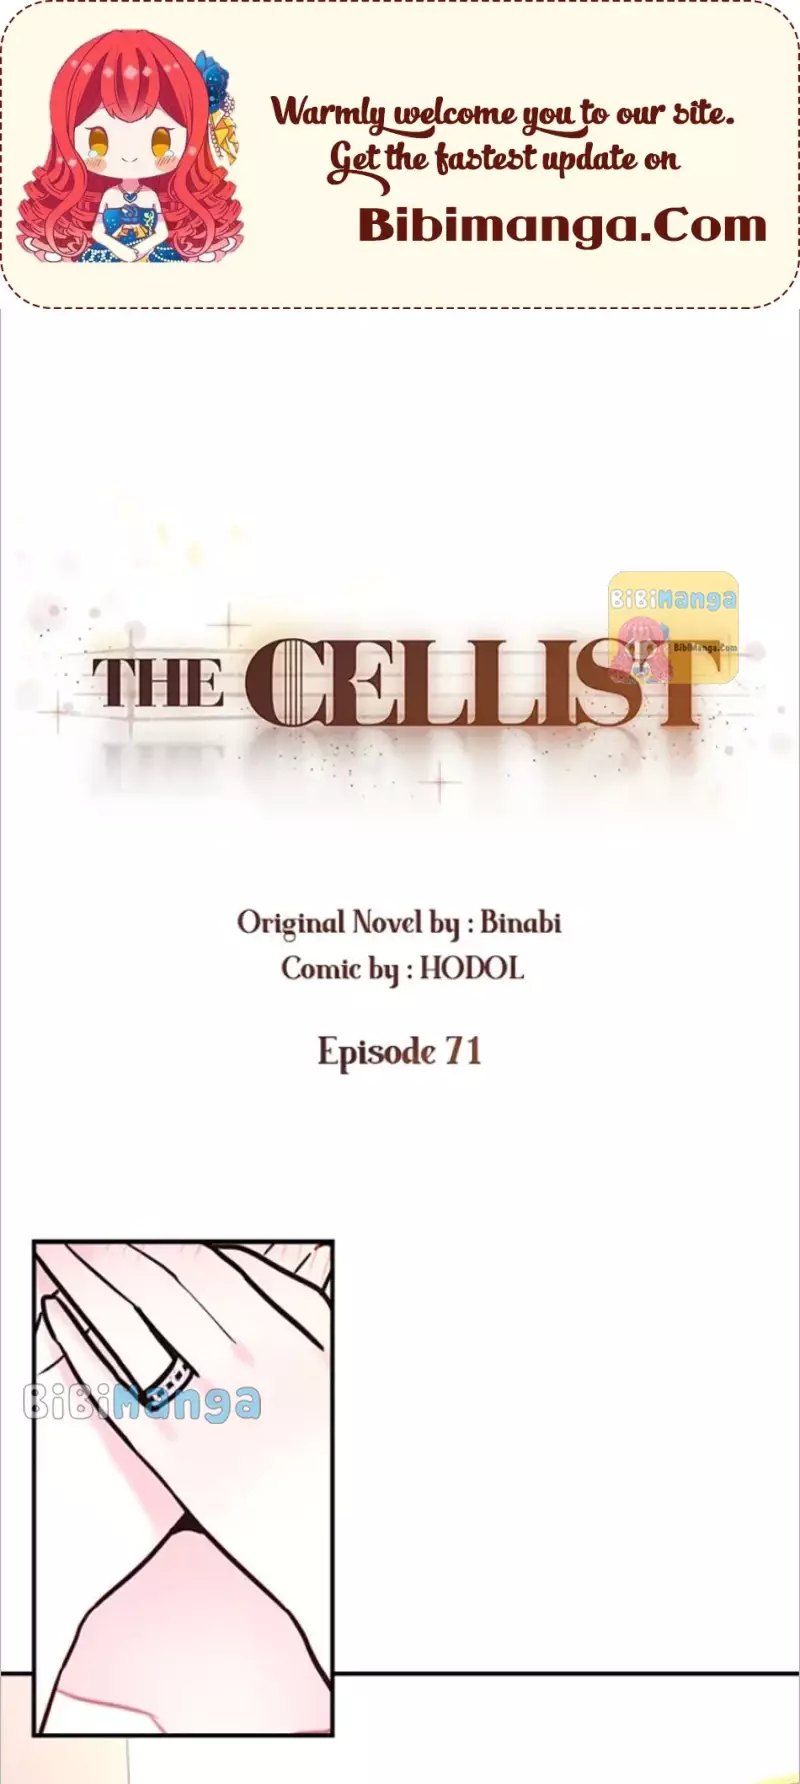 The Cellist - 71 page 1-49f425b1